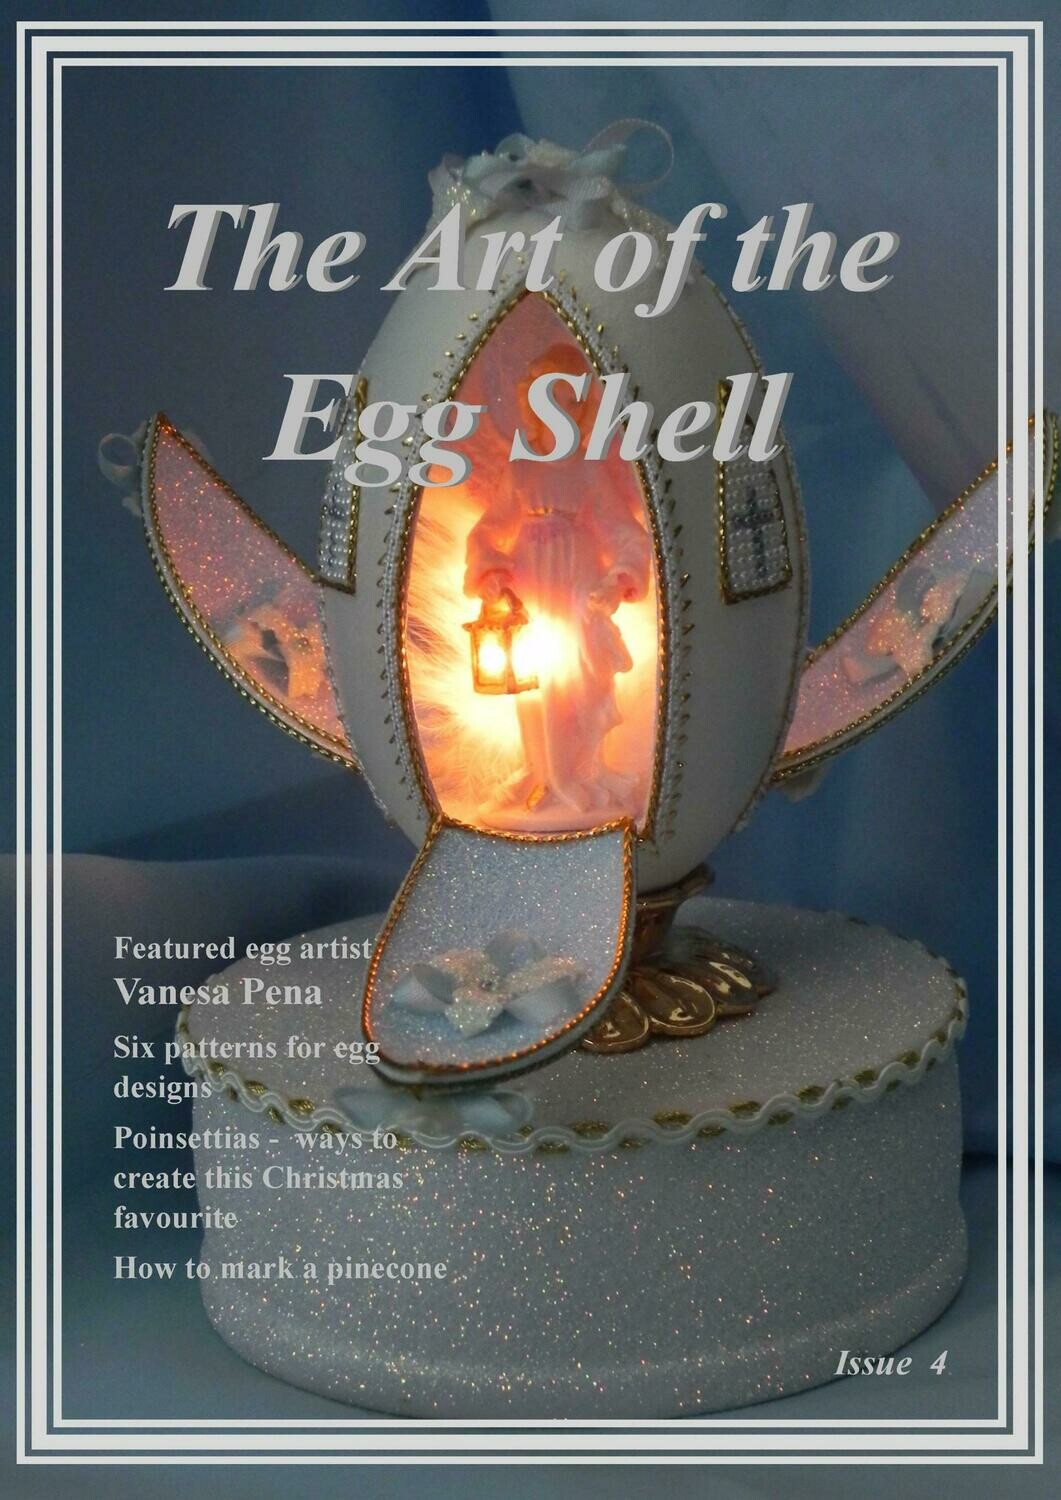 PDF Downloadable - The Art of the Egg Shell - Issue 4